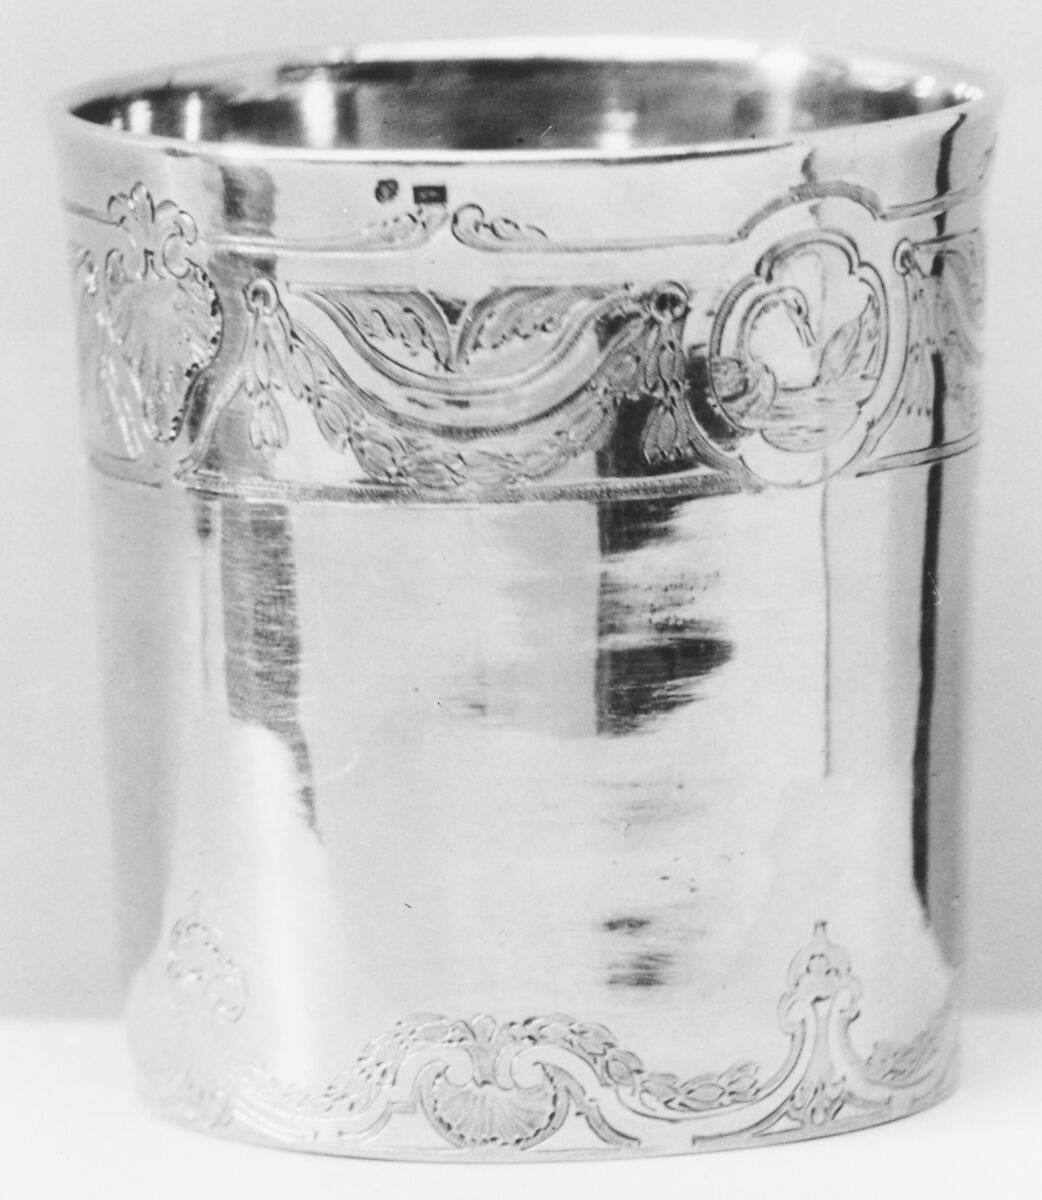 Beaker (Timbale), Silver gilt, French, Paris 